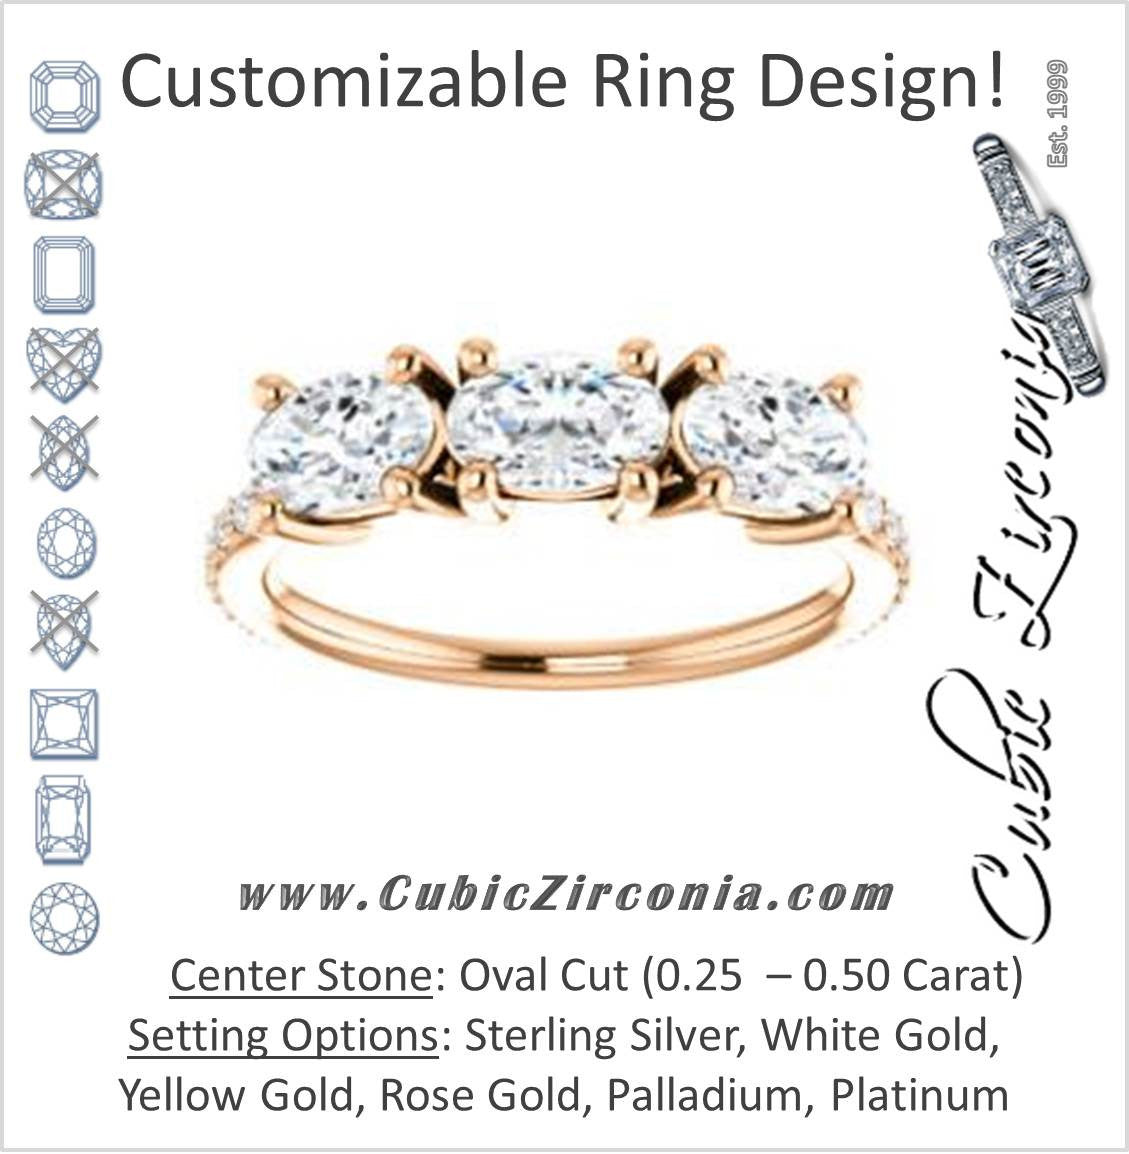 Cubic Zirconia Engagement Ring- The Mary Helen (Customizable Triple Oval Cut Design with Ultra Thin Pavé Band)